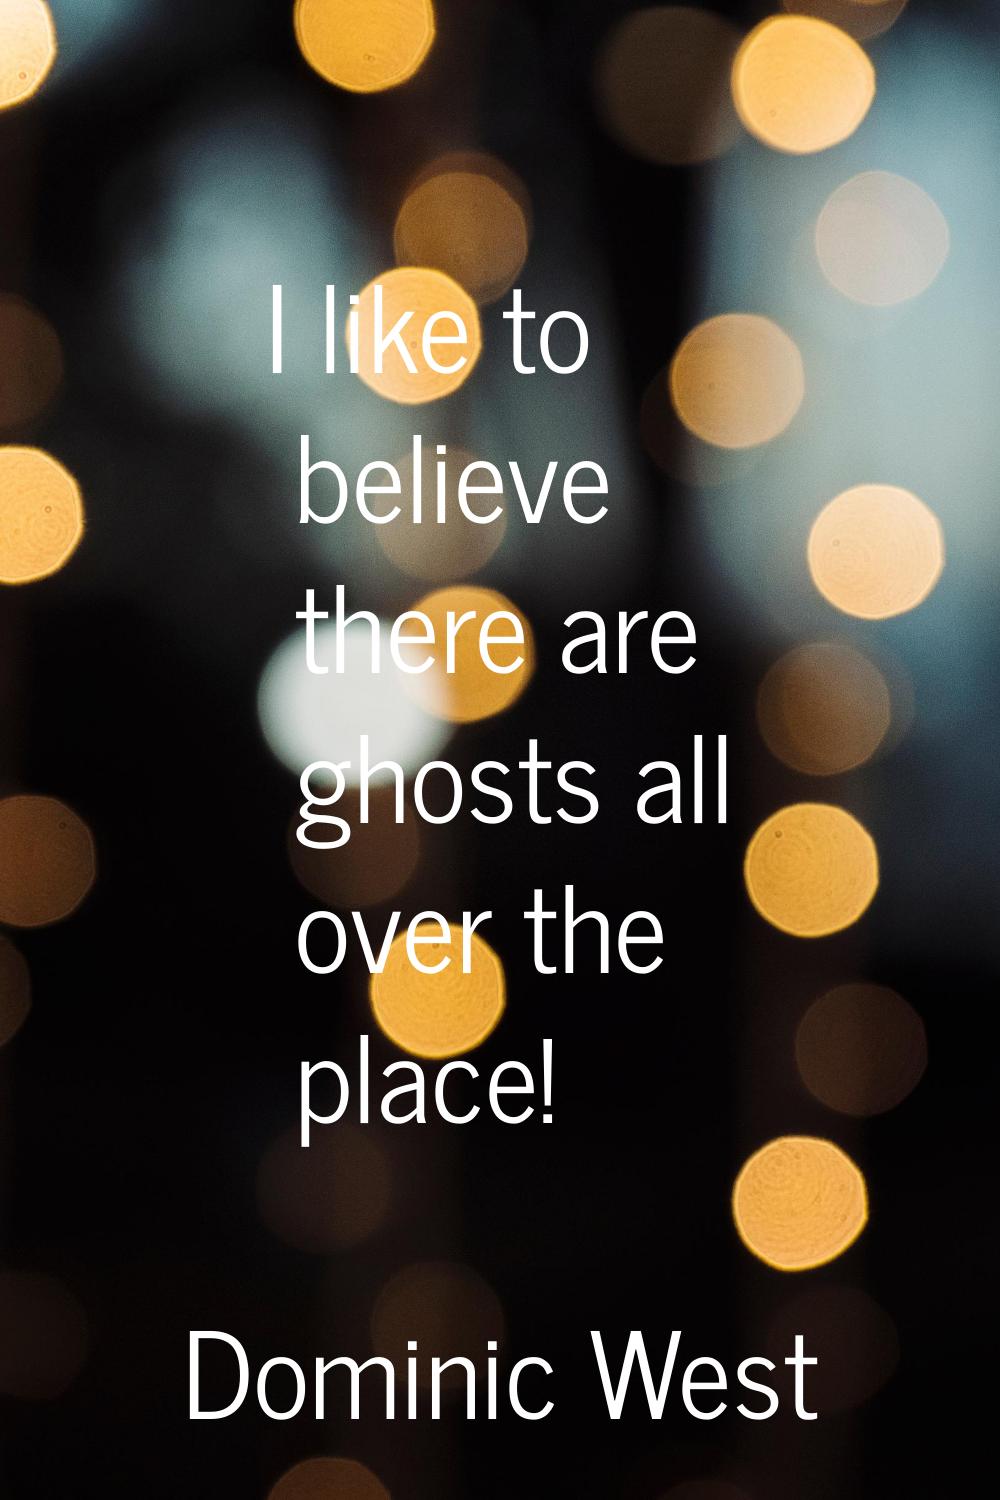 I like to believe there are ghosts all over the place!